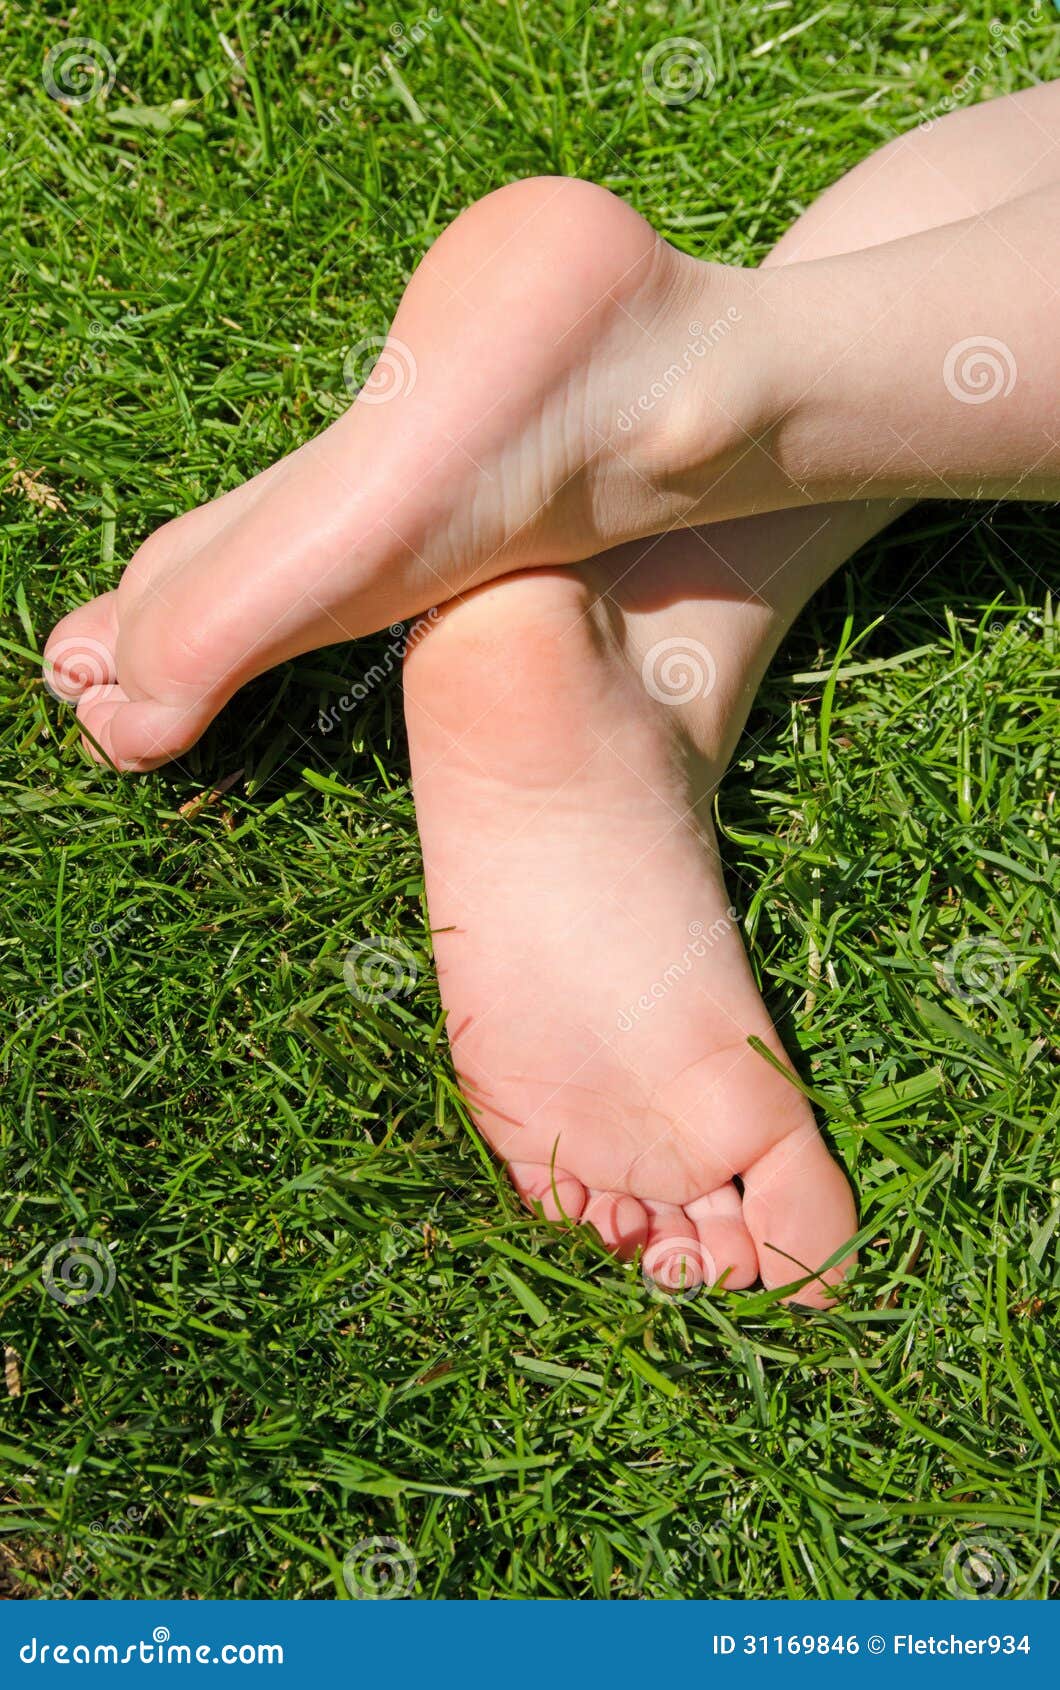 Bare Feet In Green Grass Royalty Free Stock Image Image 31169846